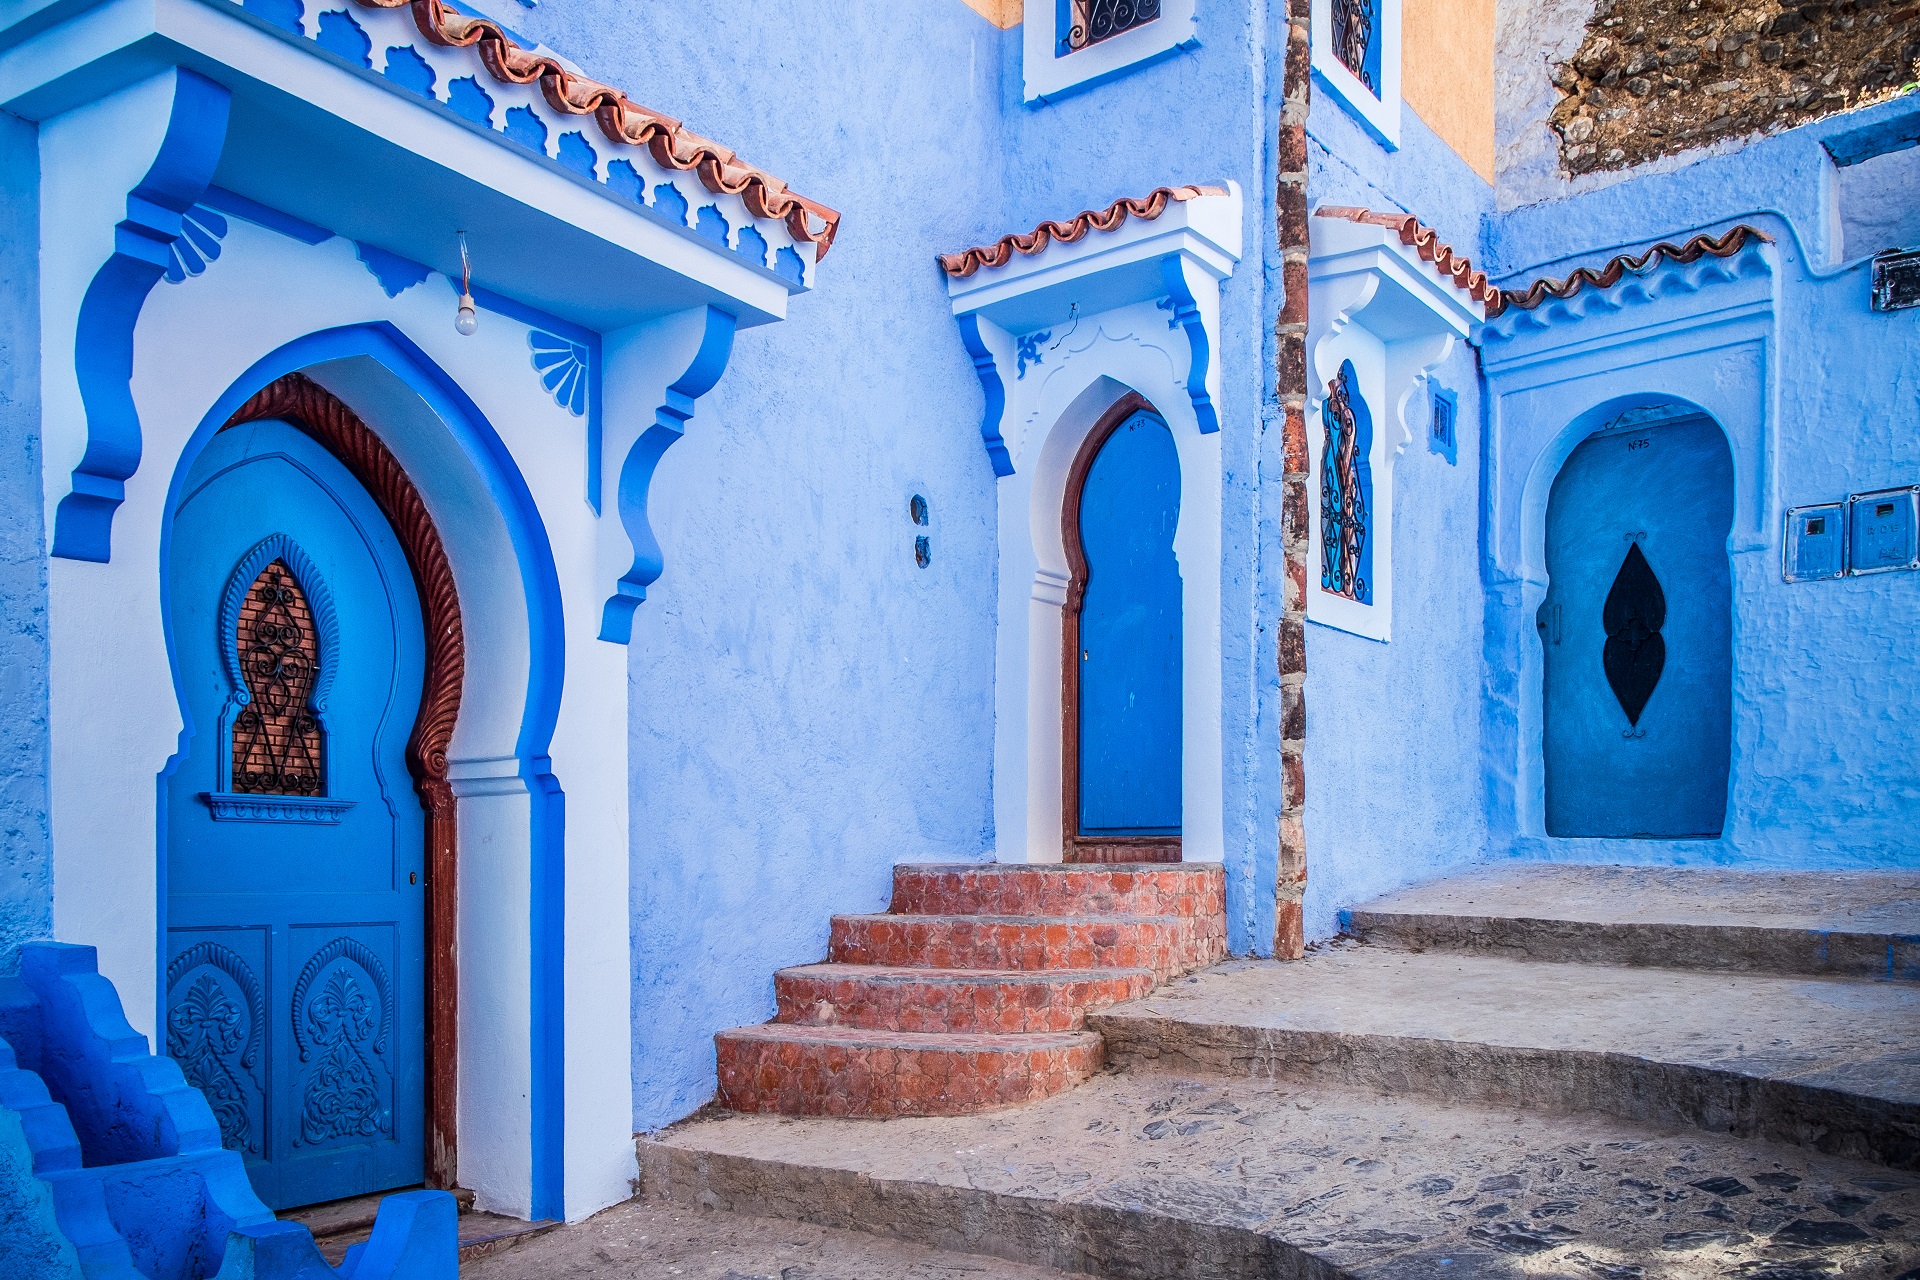 A Blue Day in Chefchaouen, Morocco